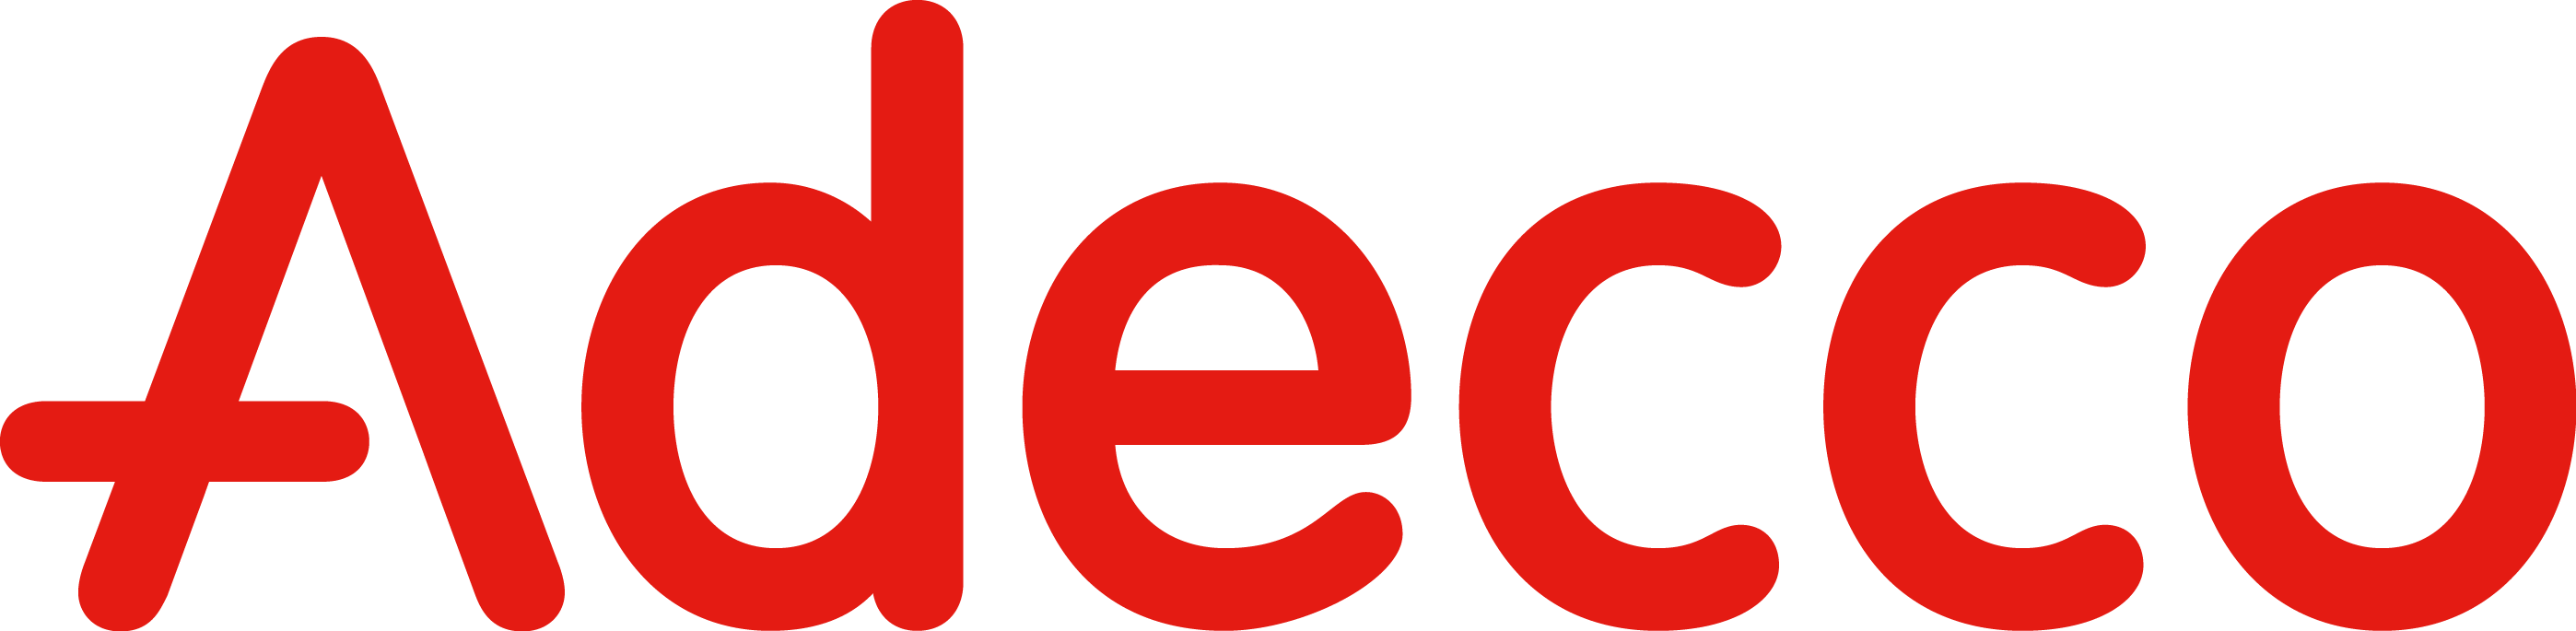 LOGO_ADECCO_2020_05_21_2.PNG